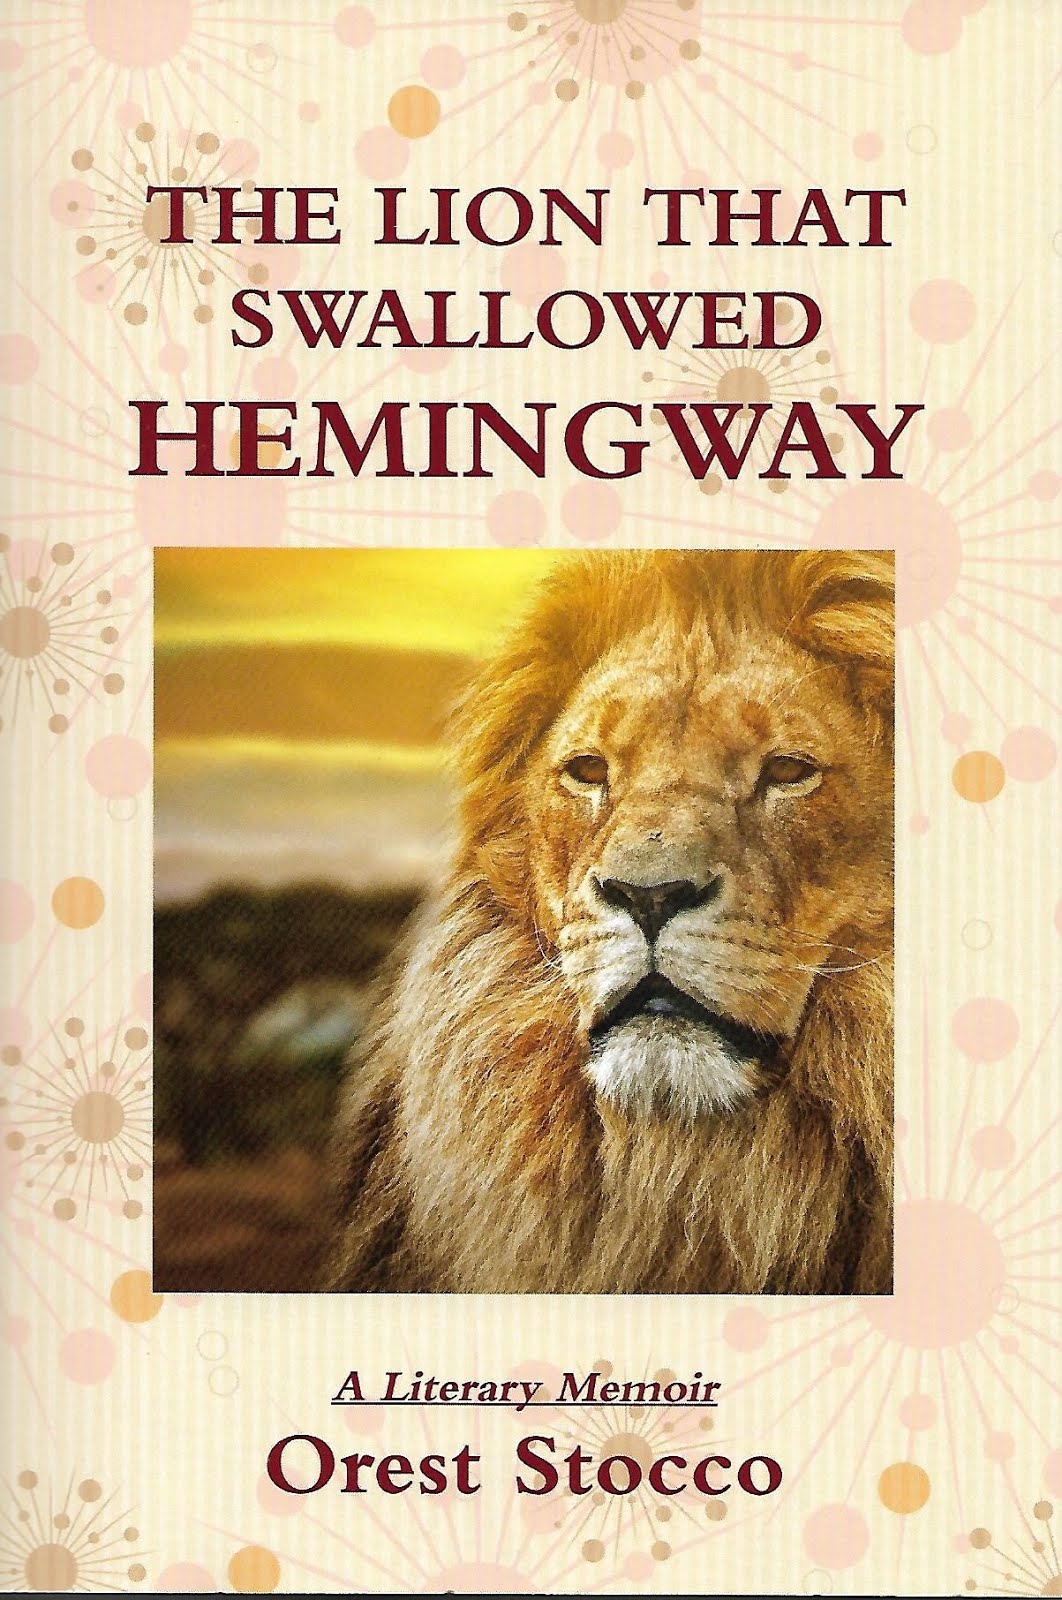 The Lion That Swallowed Hemingway